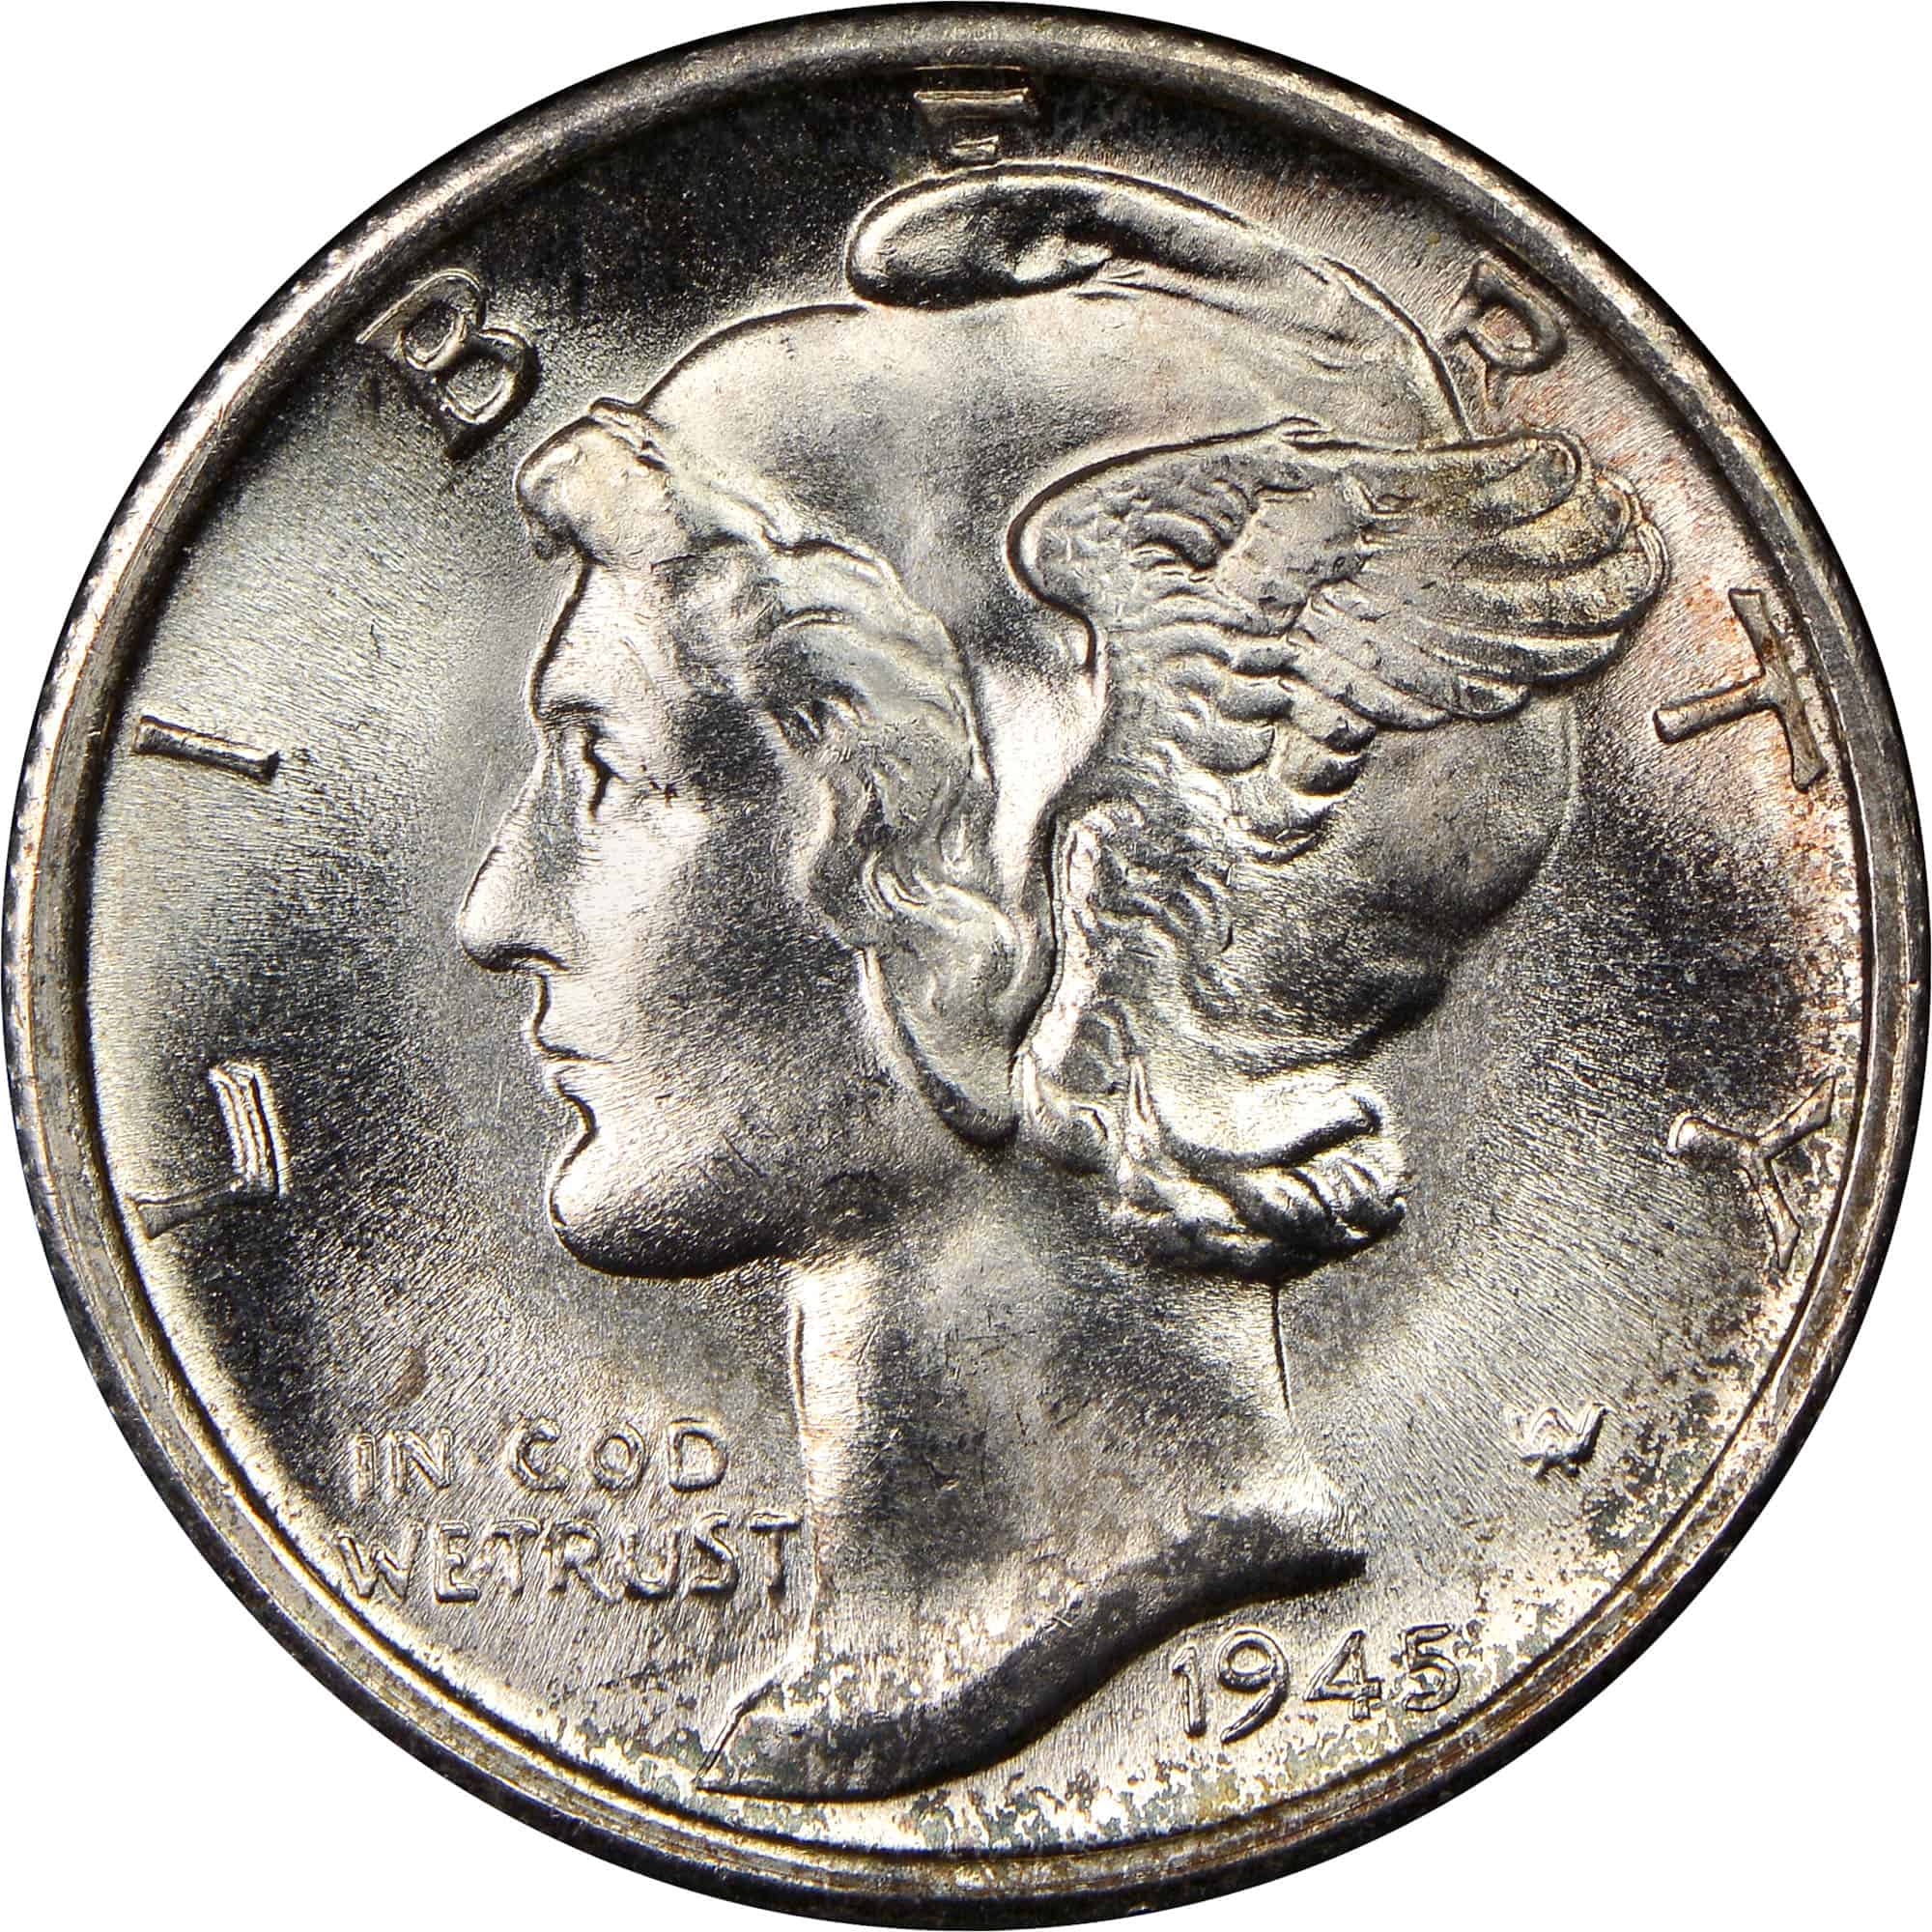 The Obverse of the 1945 Mercury Dime